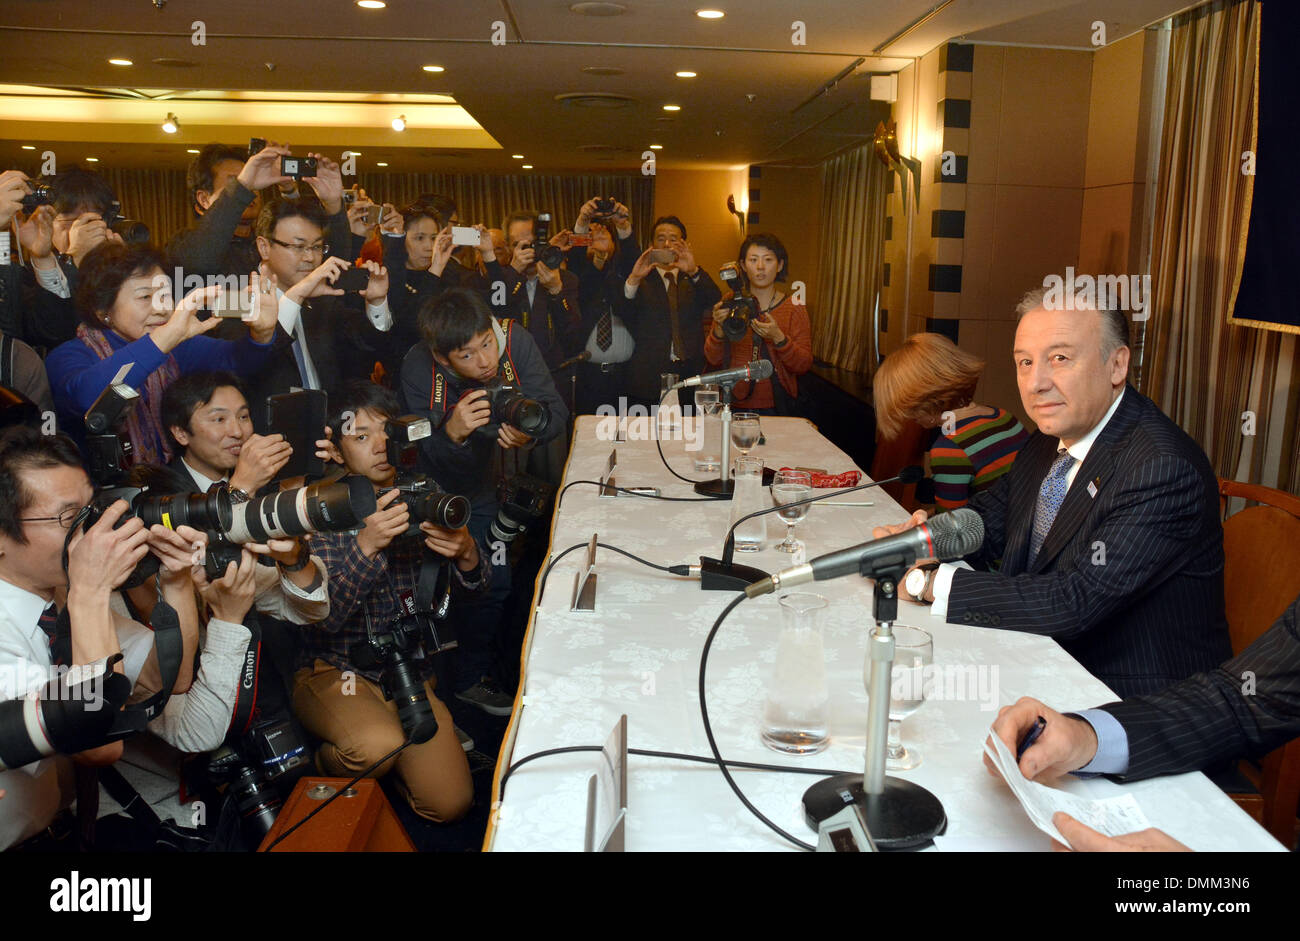 Tokyo, Japan. 16th Dec, 2013. Alberto Zaccheroni, right, the Italian head coach of japan's national football team, faces a battery of photographers at the start of a news conference at Tokyo's Foreign Correspondents' Club of Japan on Monday, December 16, 2013. Zaccheroni and his 11 in the Samurai Blue will meet Ivory Coast, Colombia and Greece in the 2014 FIFA World Cup elimination round slated for June in Brazil. Credit:  Natsuki Sakai/AFLO/Alamy Live News Stock Photo